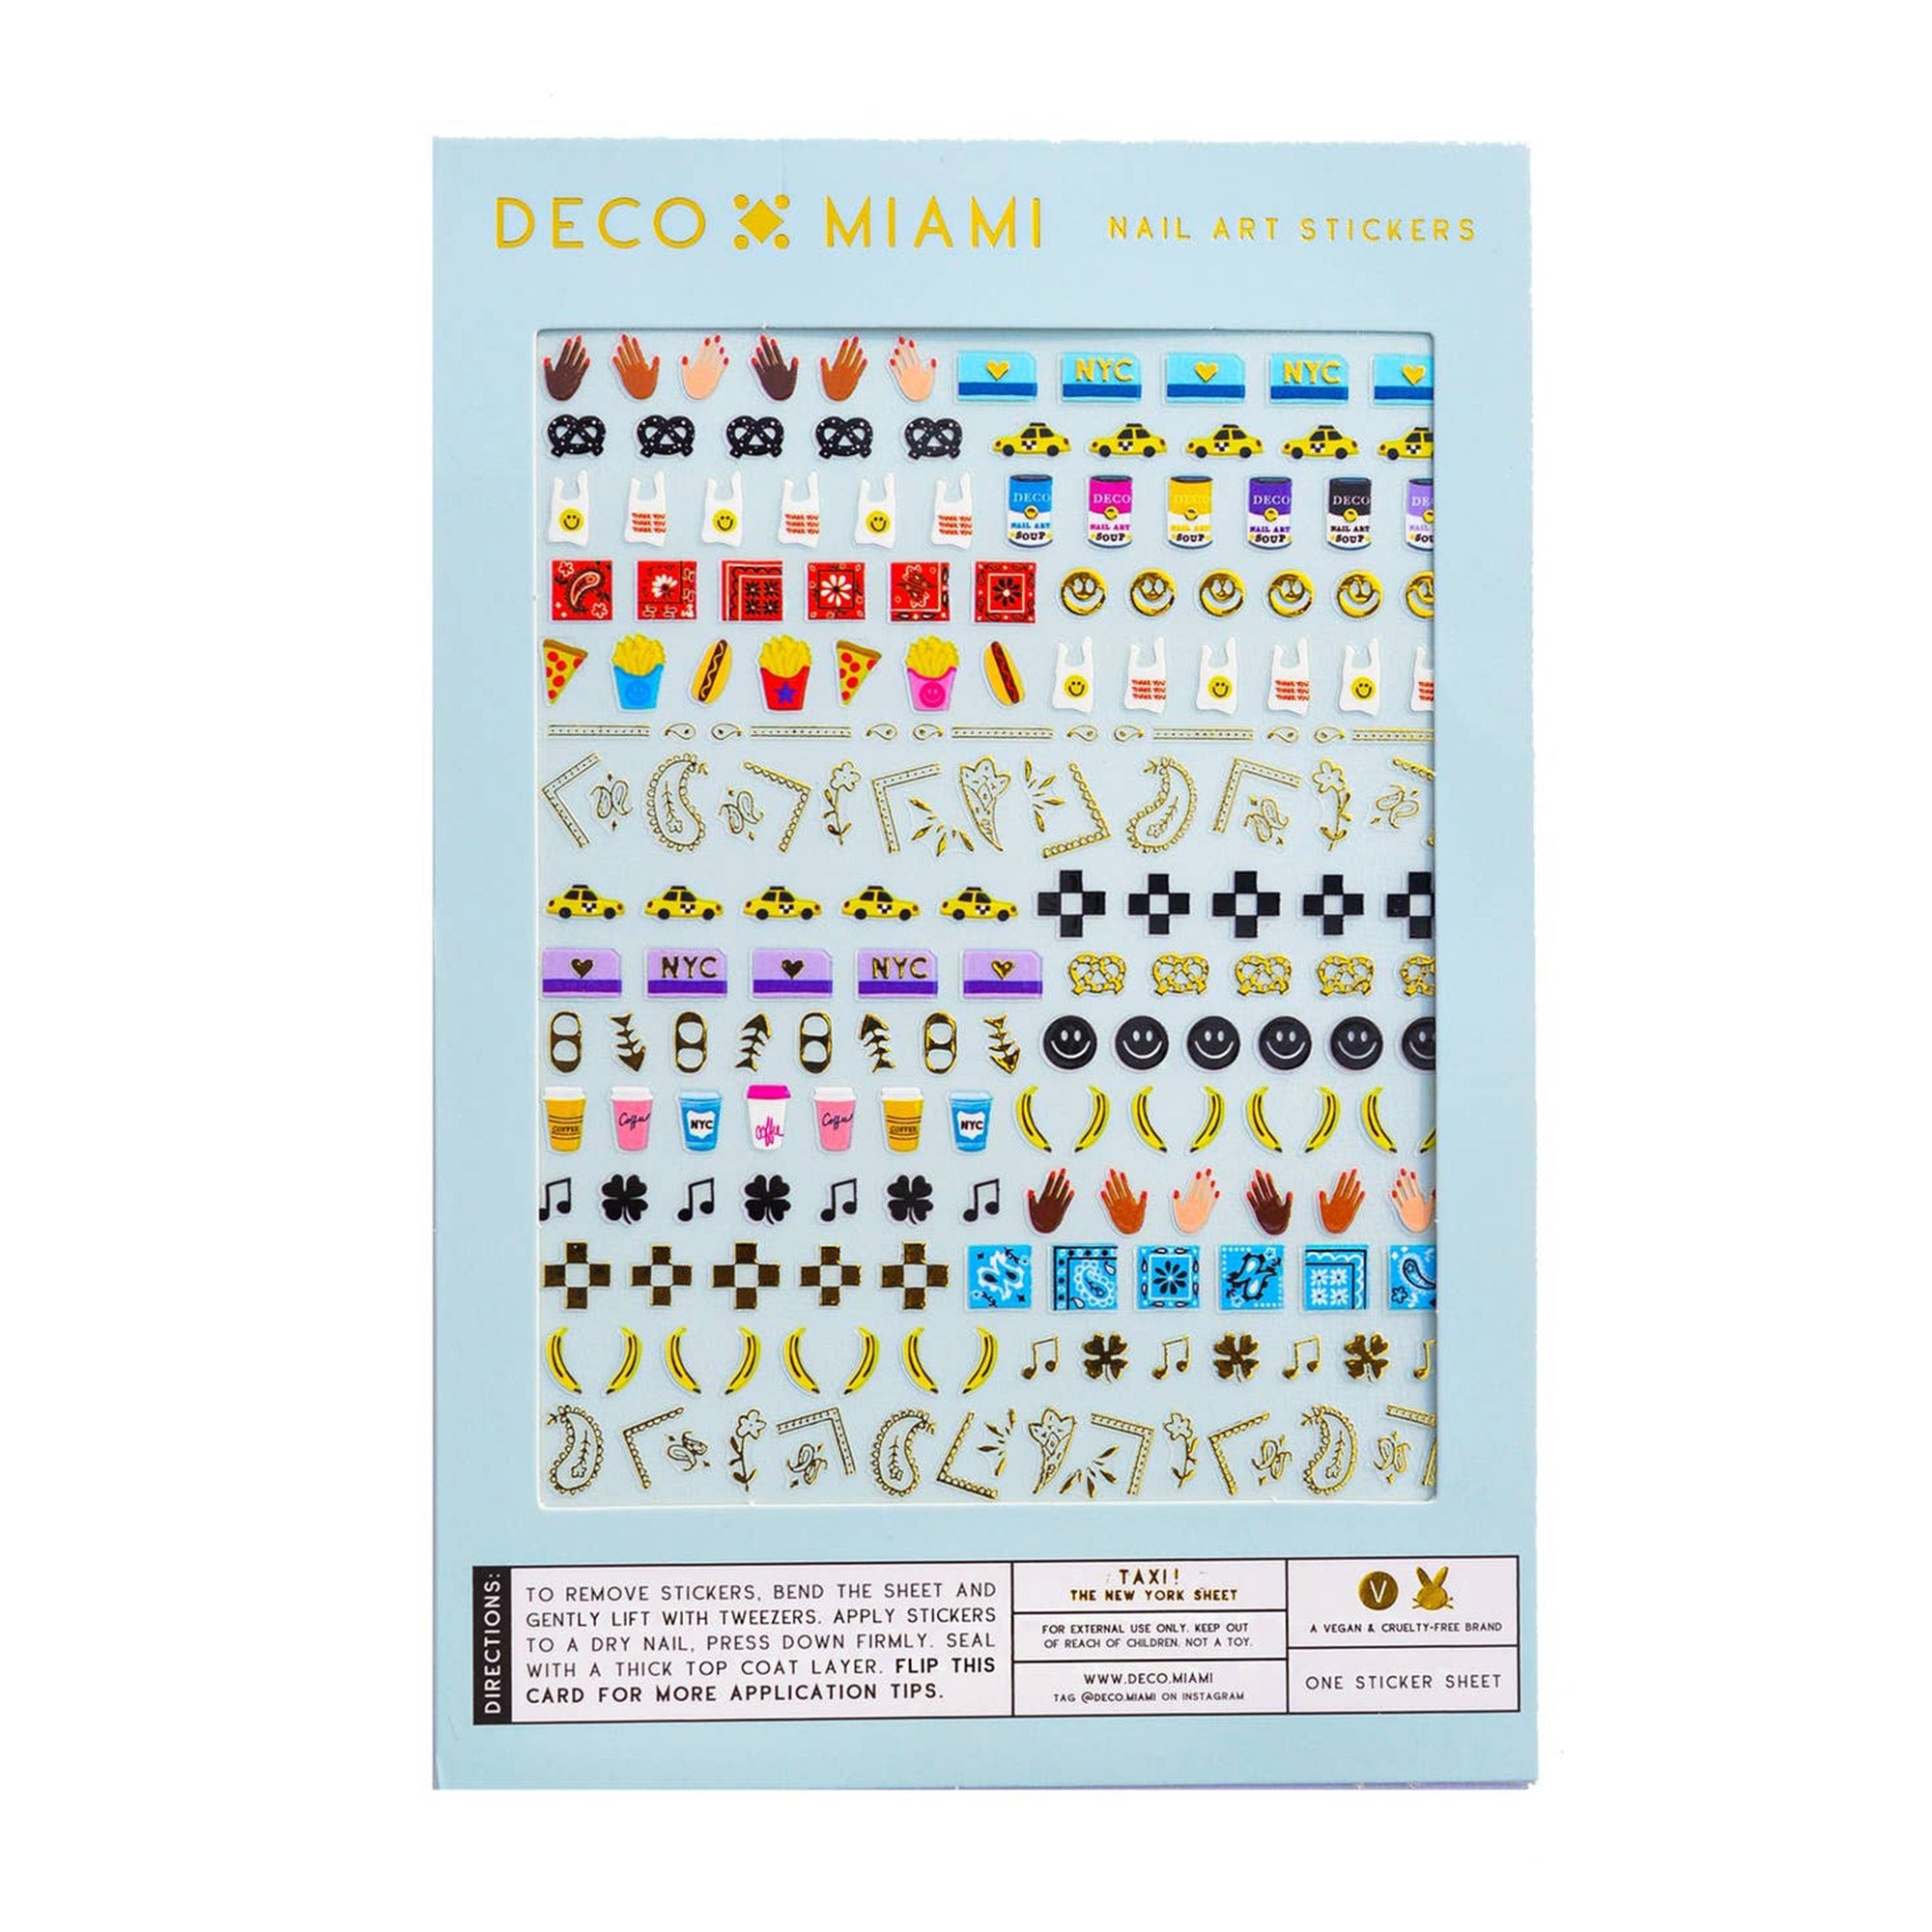 Deco Miami Nail Art Stickers / Taxi! Metro Cards, Taxi Cabs, Soup Can, Andy Warhol,  Banana, Pizza, Hands, Paisley, Checkers, Travel